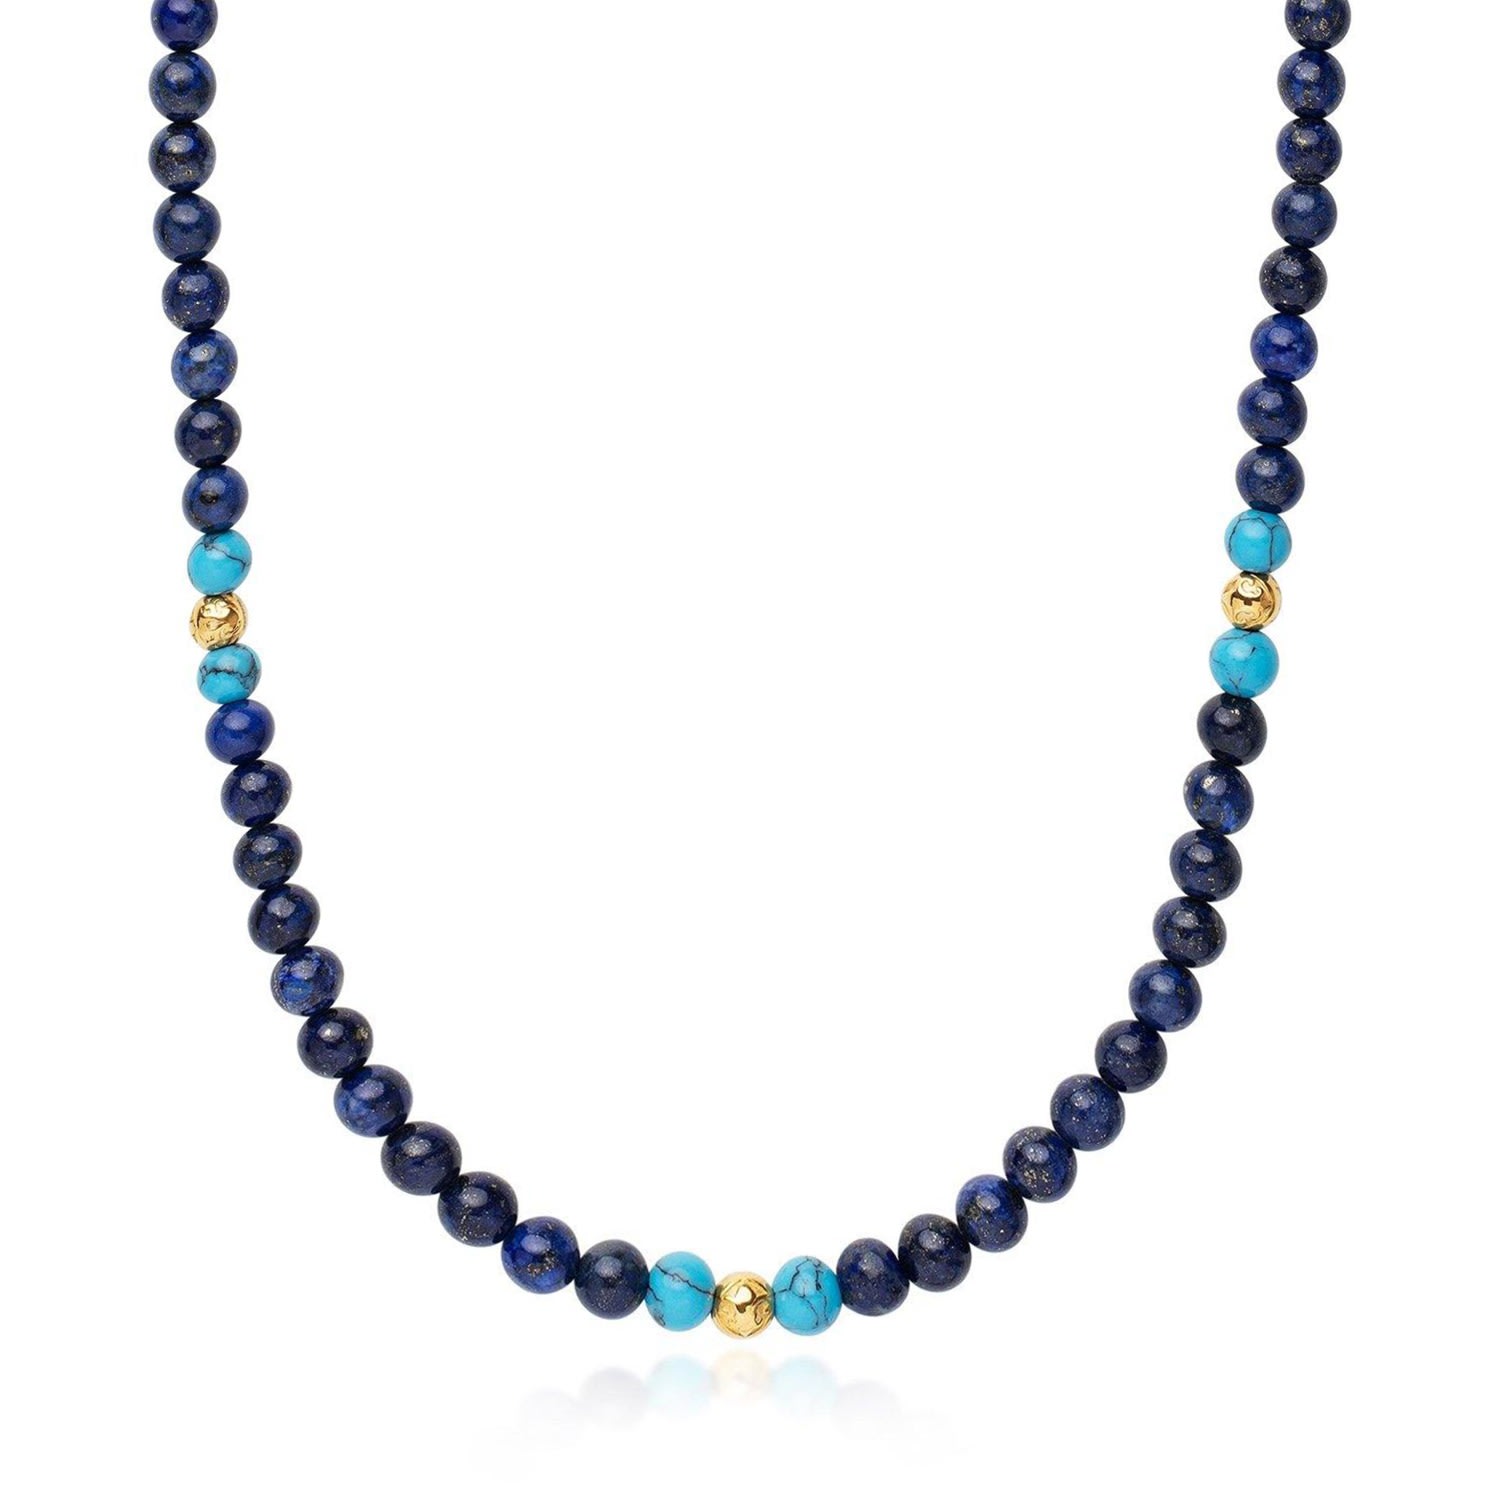 Nialaya Men's Gold / Blue Beaded Necklace With Blue Lapis, Turquoise, & Gold